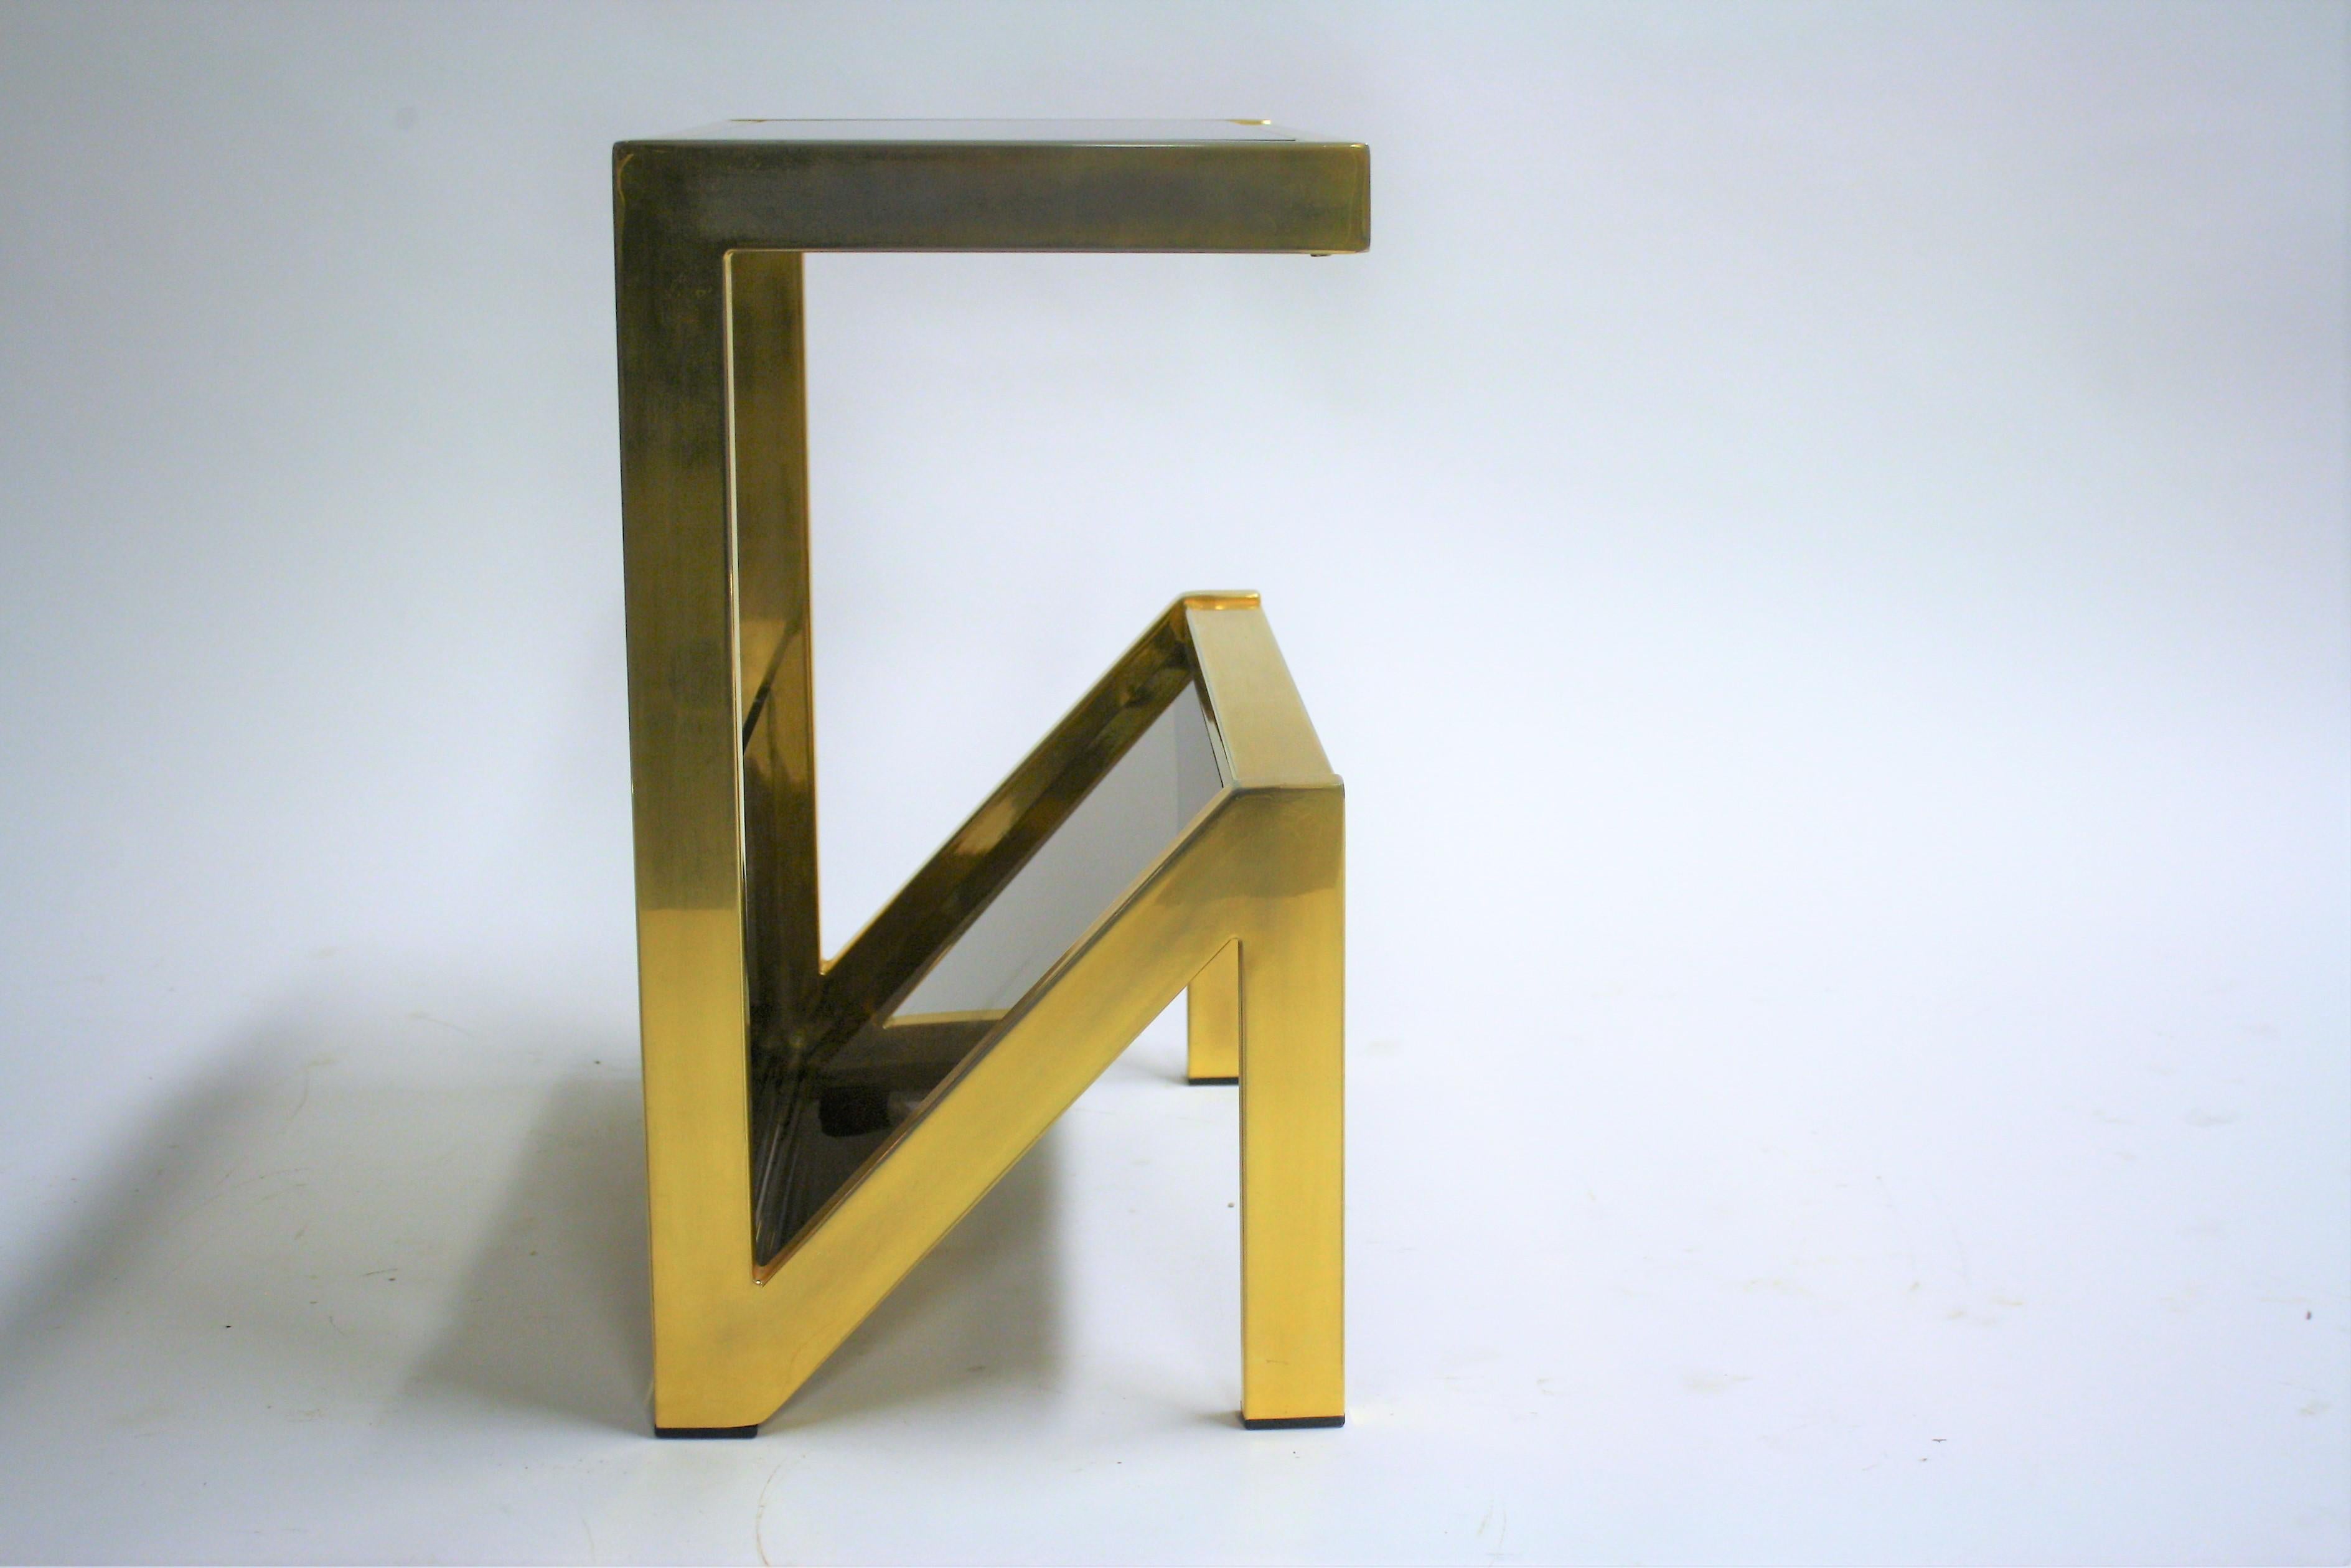 Seventies brass and smoked glass side table with magazine holder.

This table has a N shaped frame.

All original glass, no damages. Slightly faded brass on one side.

1970s - Belgium

Measures: Height 51cm/20